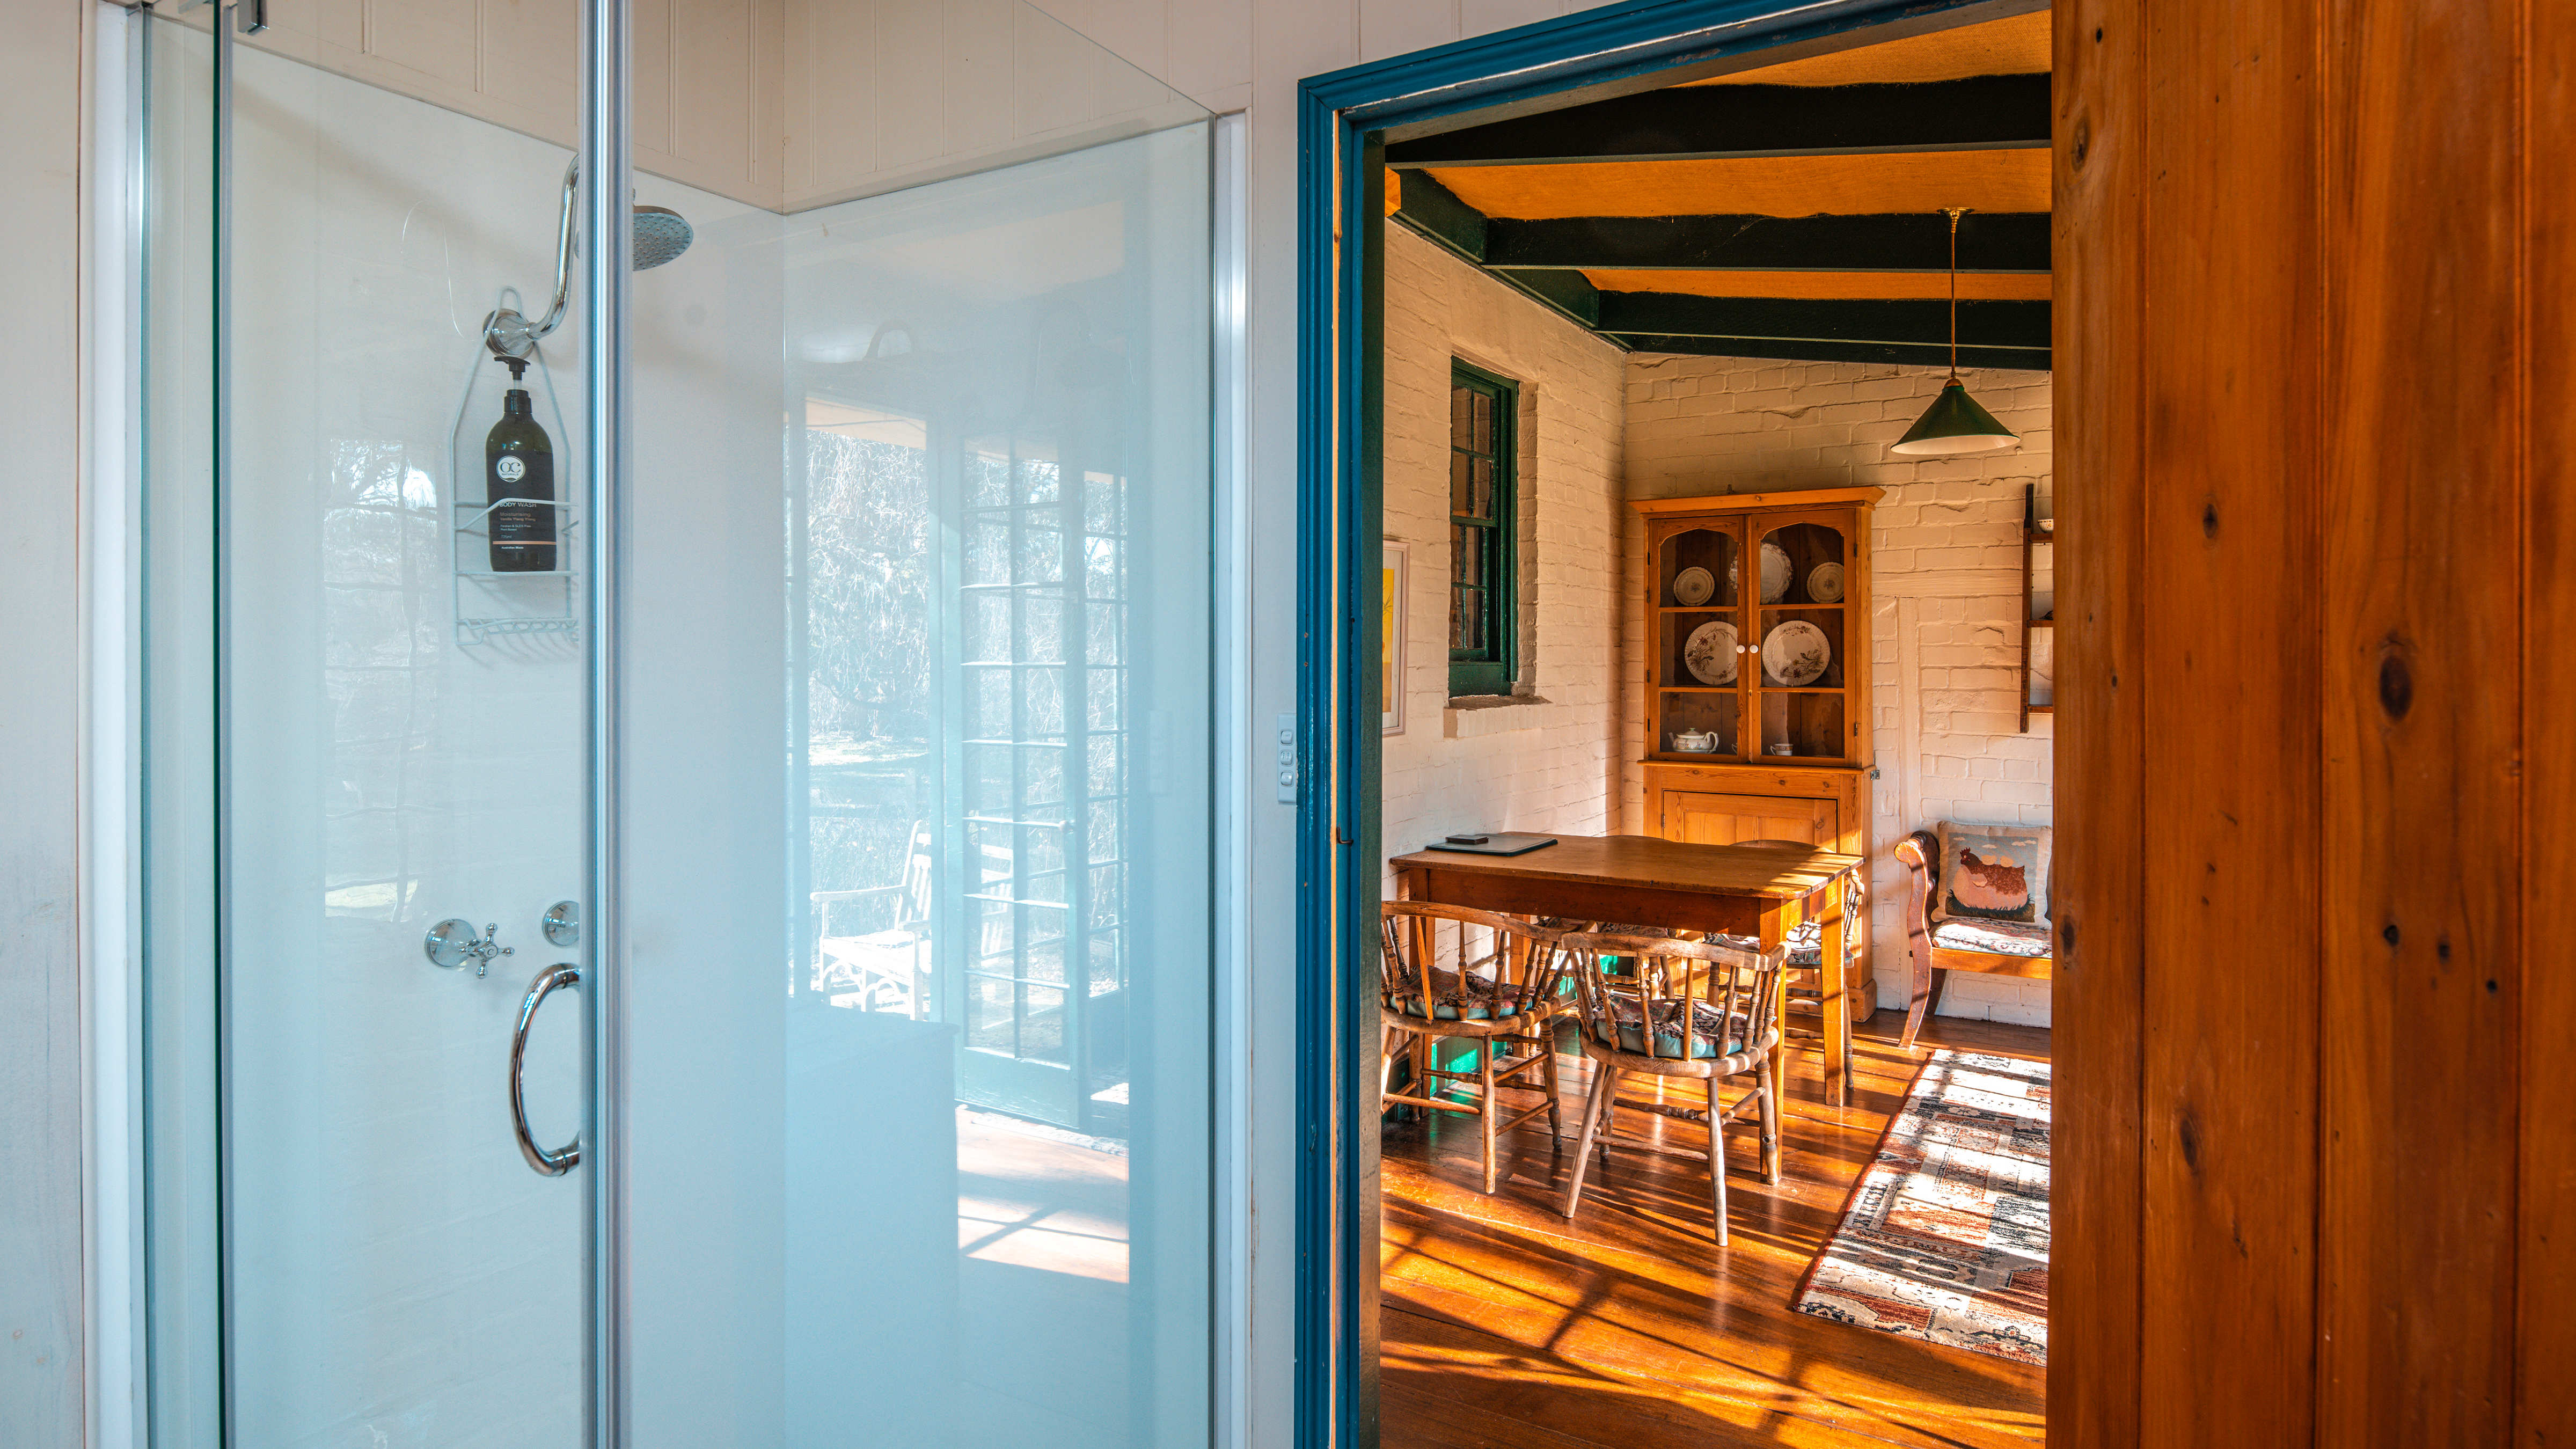 To the left of the image is a glass shower screen with a view through the timber bathroom door to the sunroom. A timber table with antique chairs around is in front of a pine dresser with antique plates displayed. A rug is on the floor boards. Photo: Rob Burnett.